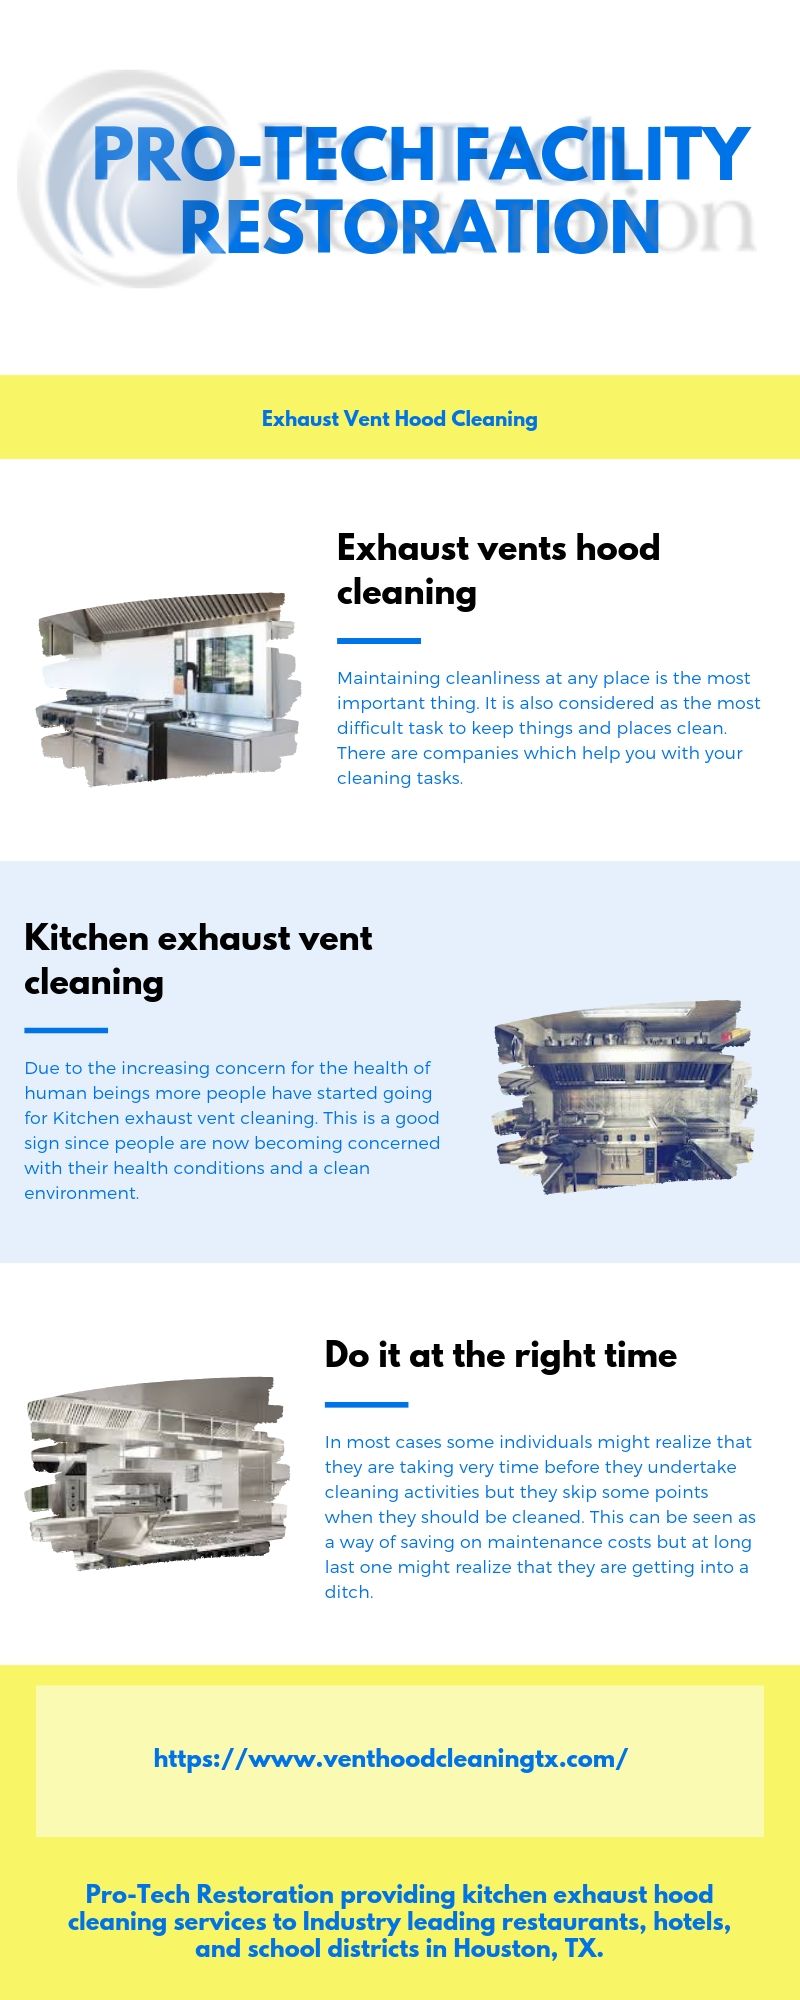 Restaurant Kitchen Exhaust Hood Cleaning.jpg  by Venthoodcleaningtx